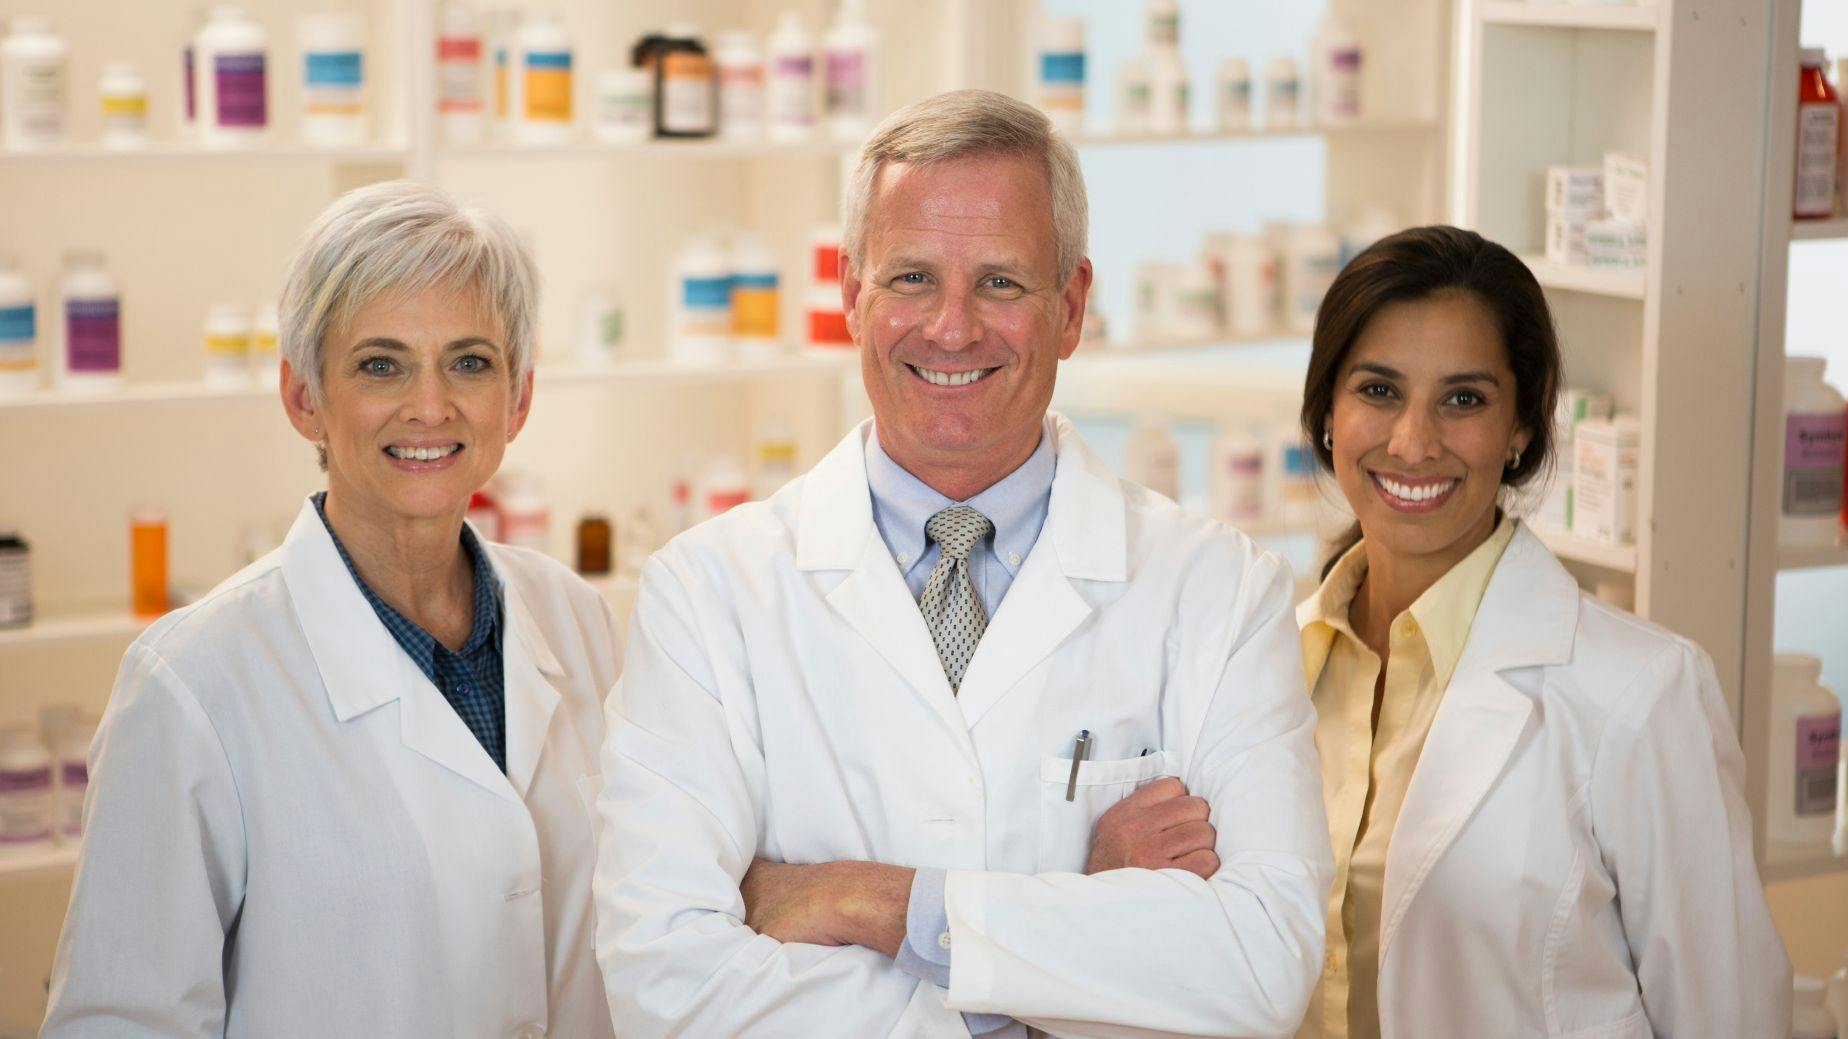 Increased Responsibilities for Pharmacy Technicians Helps Role of Pharmacist